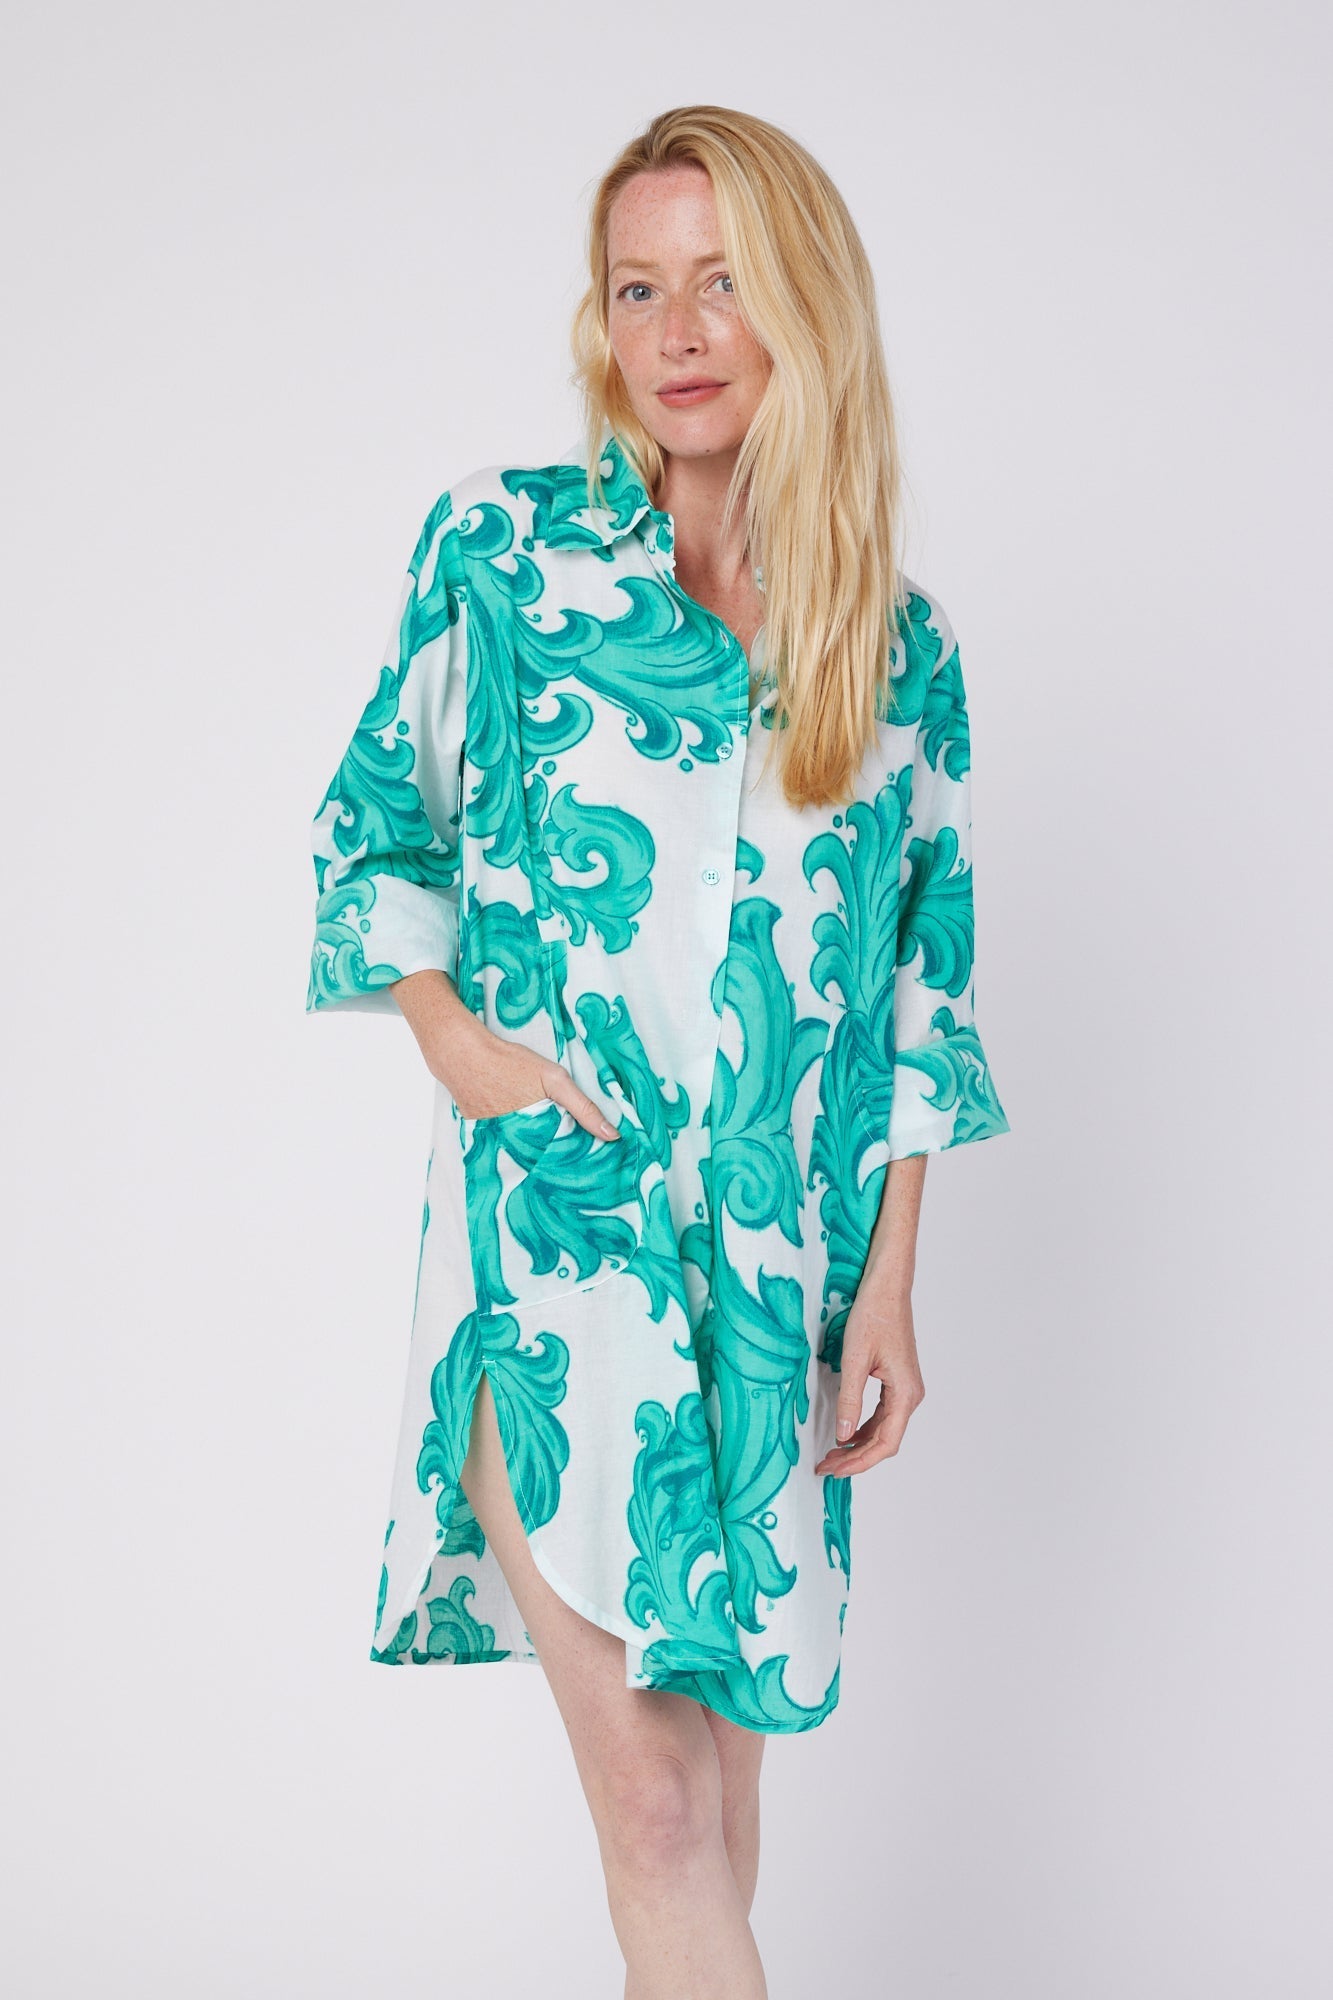 ModaPosa Gabriella 3/4 Sleeve Knee Length Shirt Dress with Collar and Pockets in White Aqua Baroque . Discover women's resort dresses and lifestyle clothing inspired by the Mediterranean. Free worldwide shipping available!